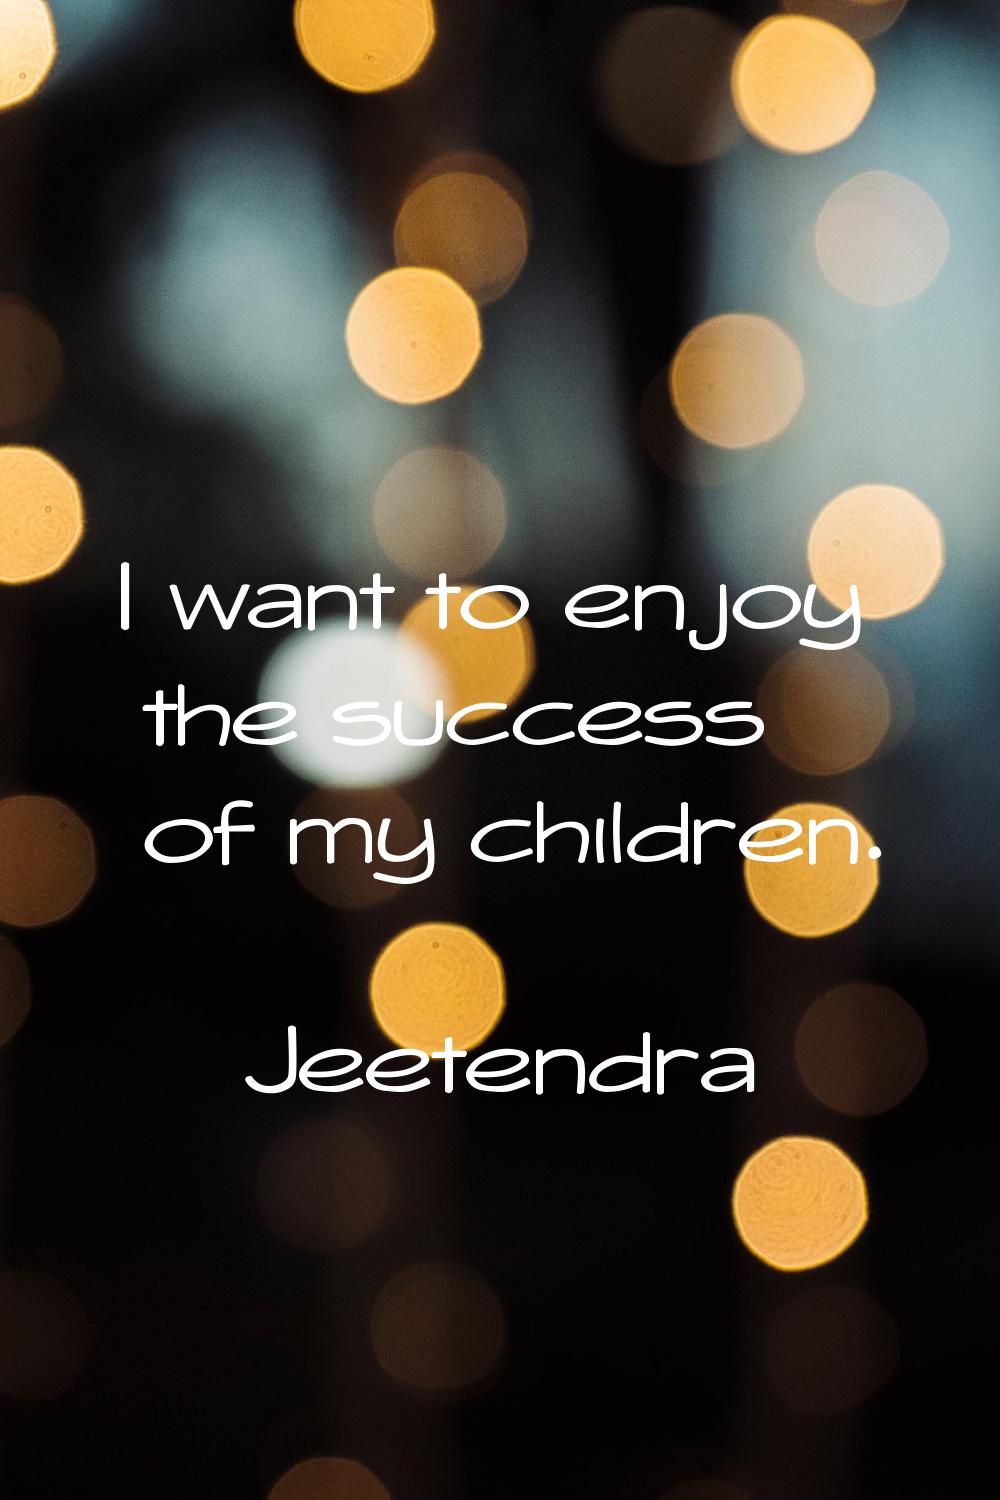 I want to enjoy the success of my children.